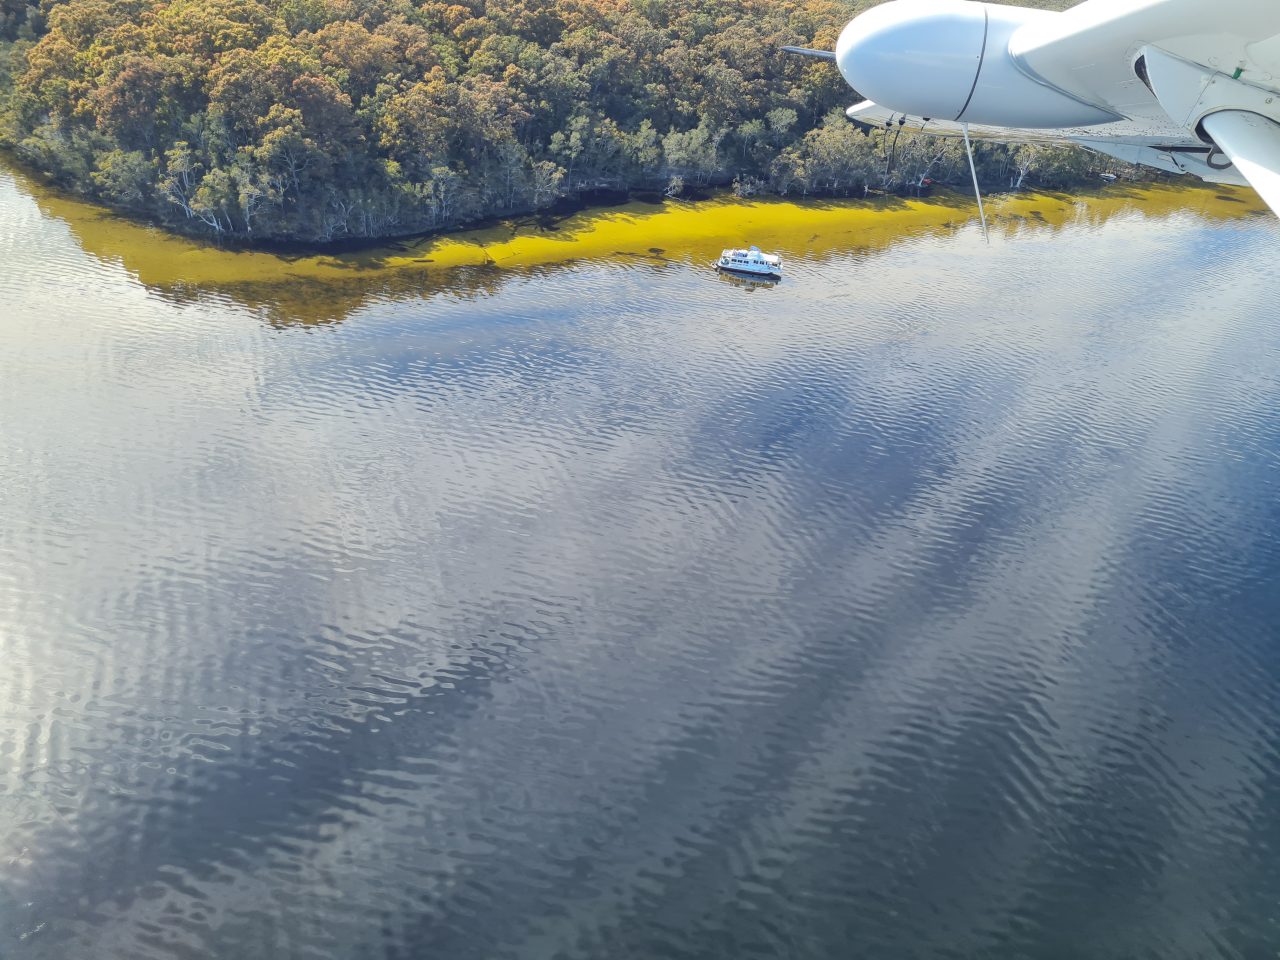 Photo from air of boat at estuarine lake edge and vegetation. Wing of aircraft in photo. 